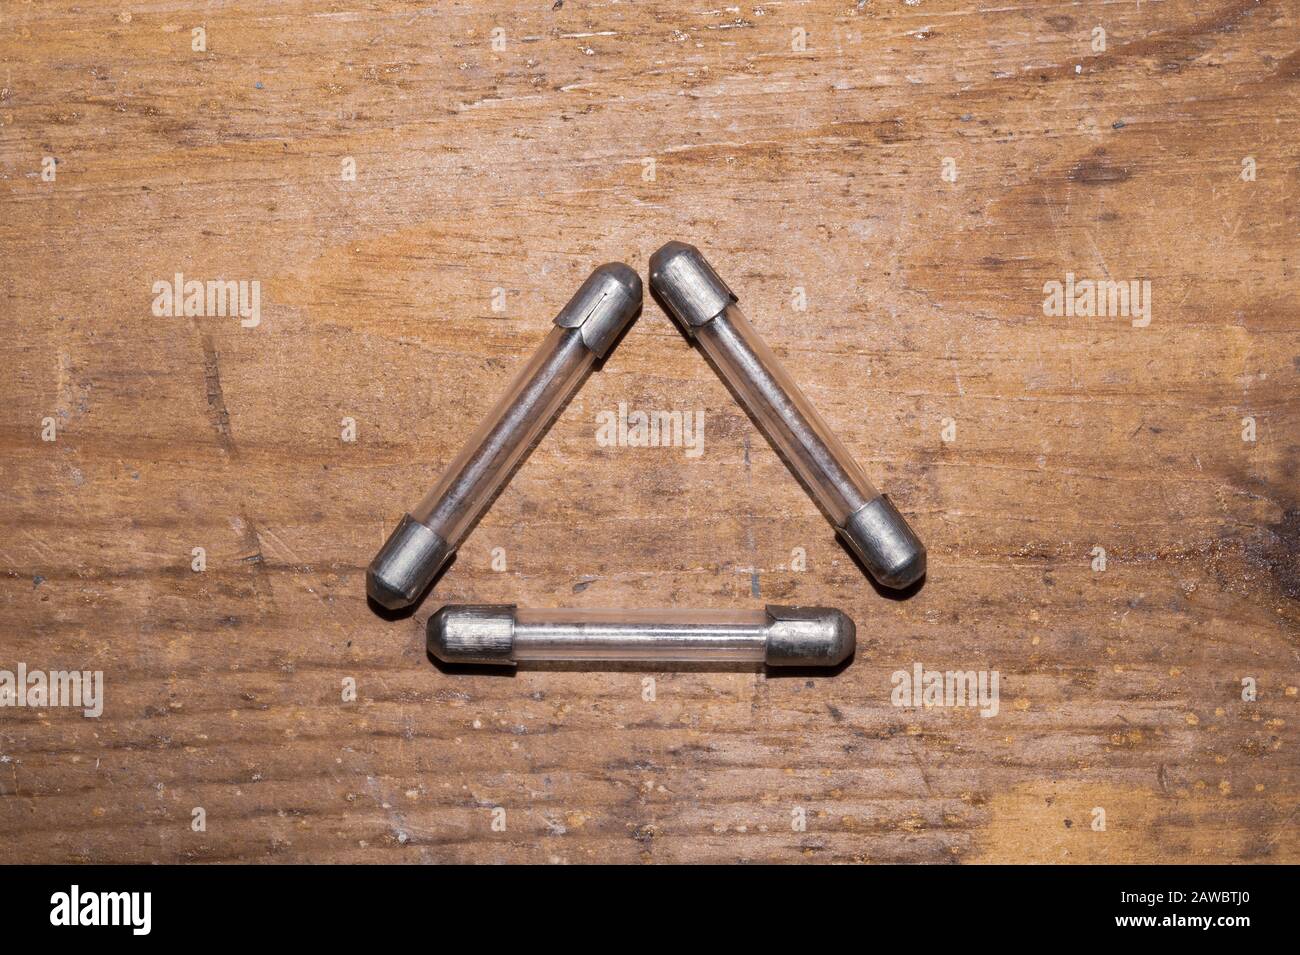 Fuse on wooden background. safety device for overcurrent protection. protection of an electrical circuit Stock Photo